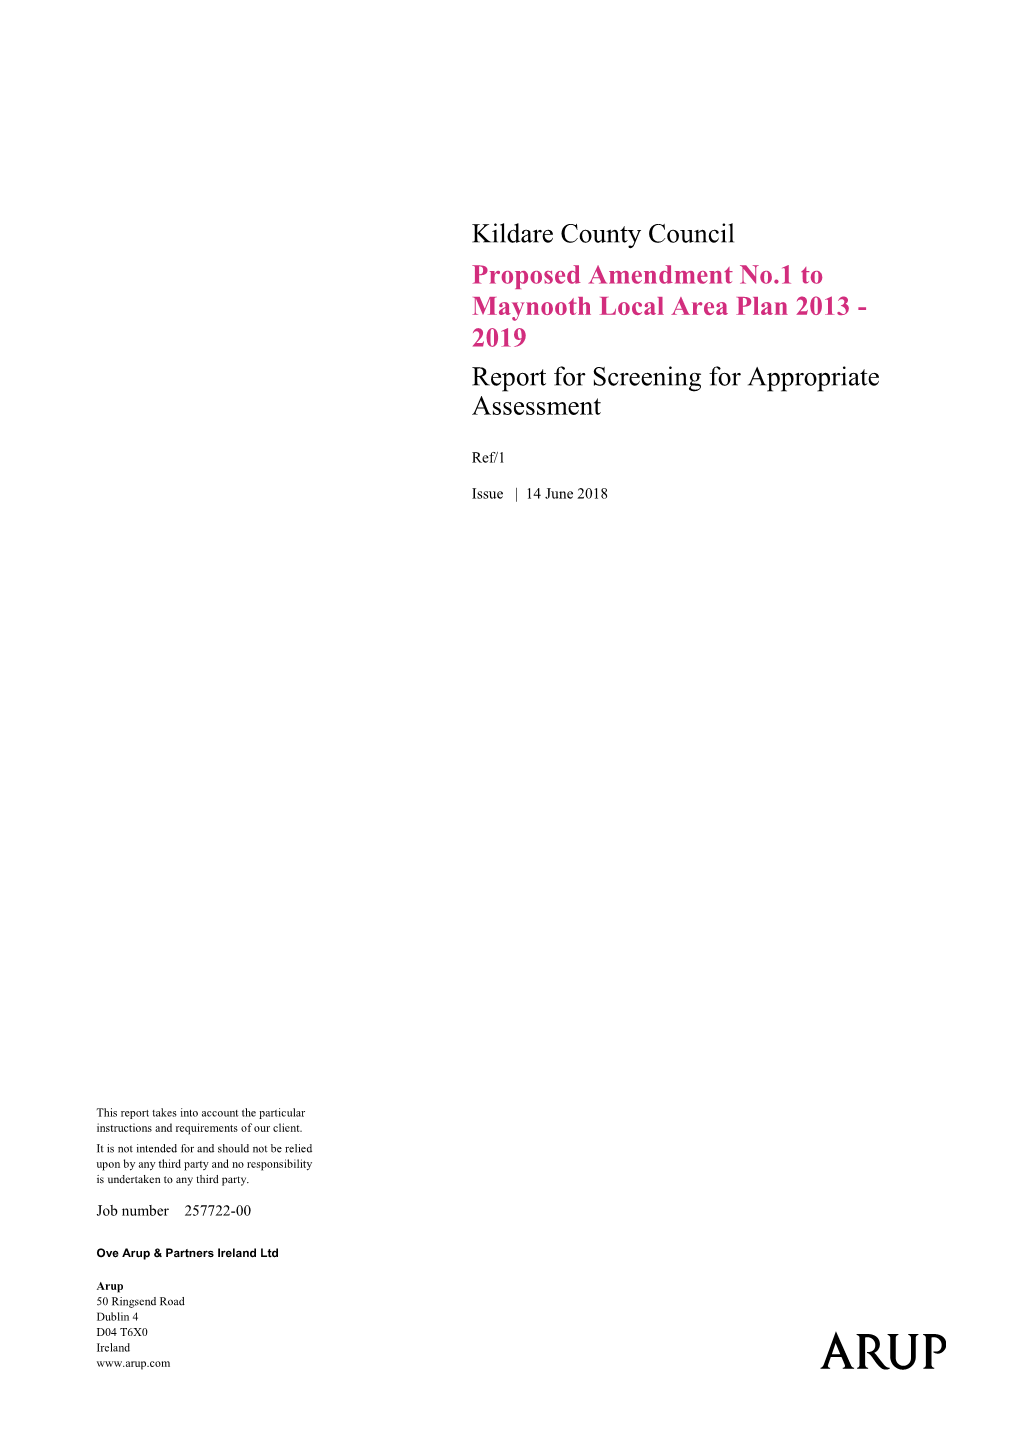 Kildare County Council Proposed Amendment No.1 to Maynooth Local Area Plan 2013 - 2019 Report for Screening for Appropriate Assessment